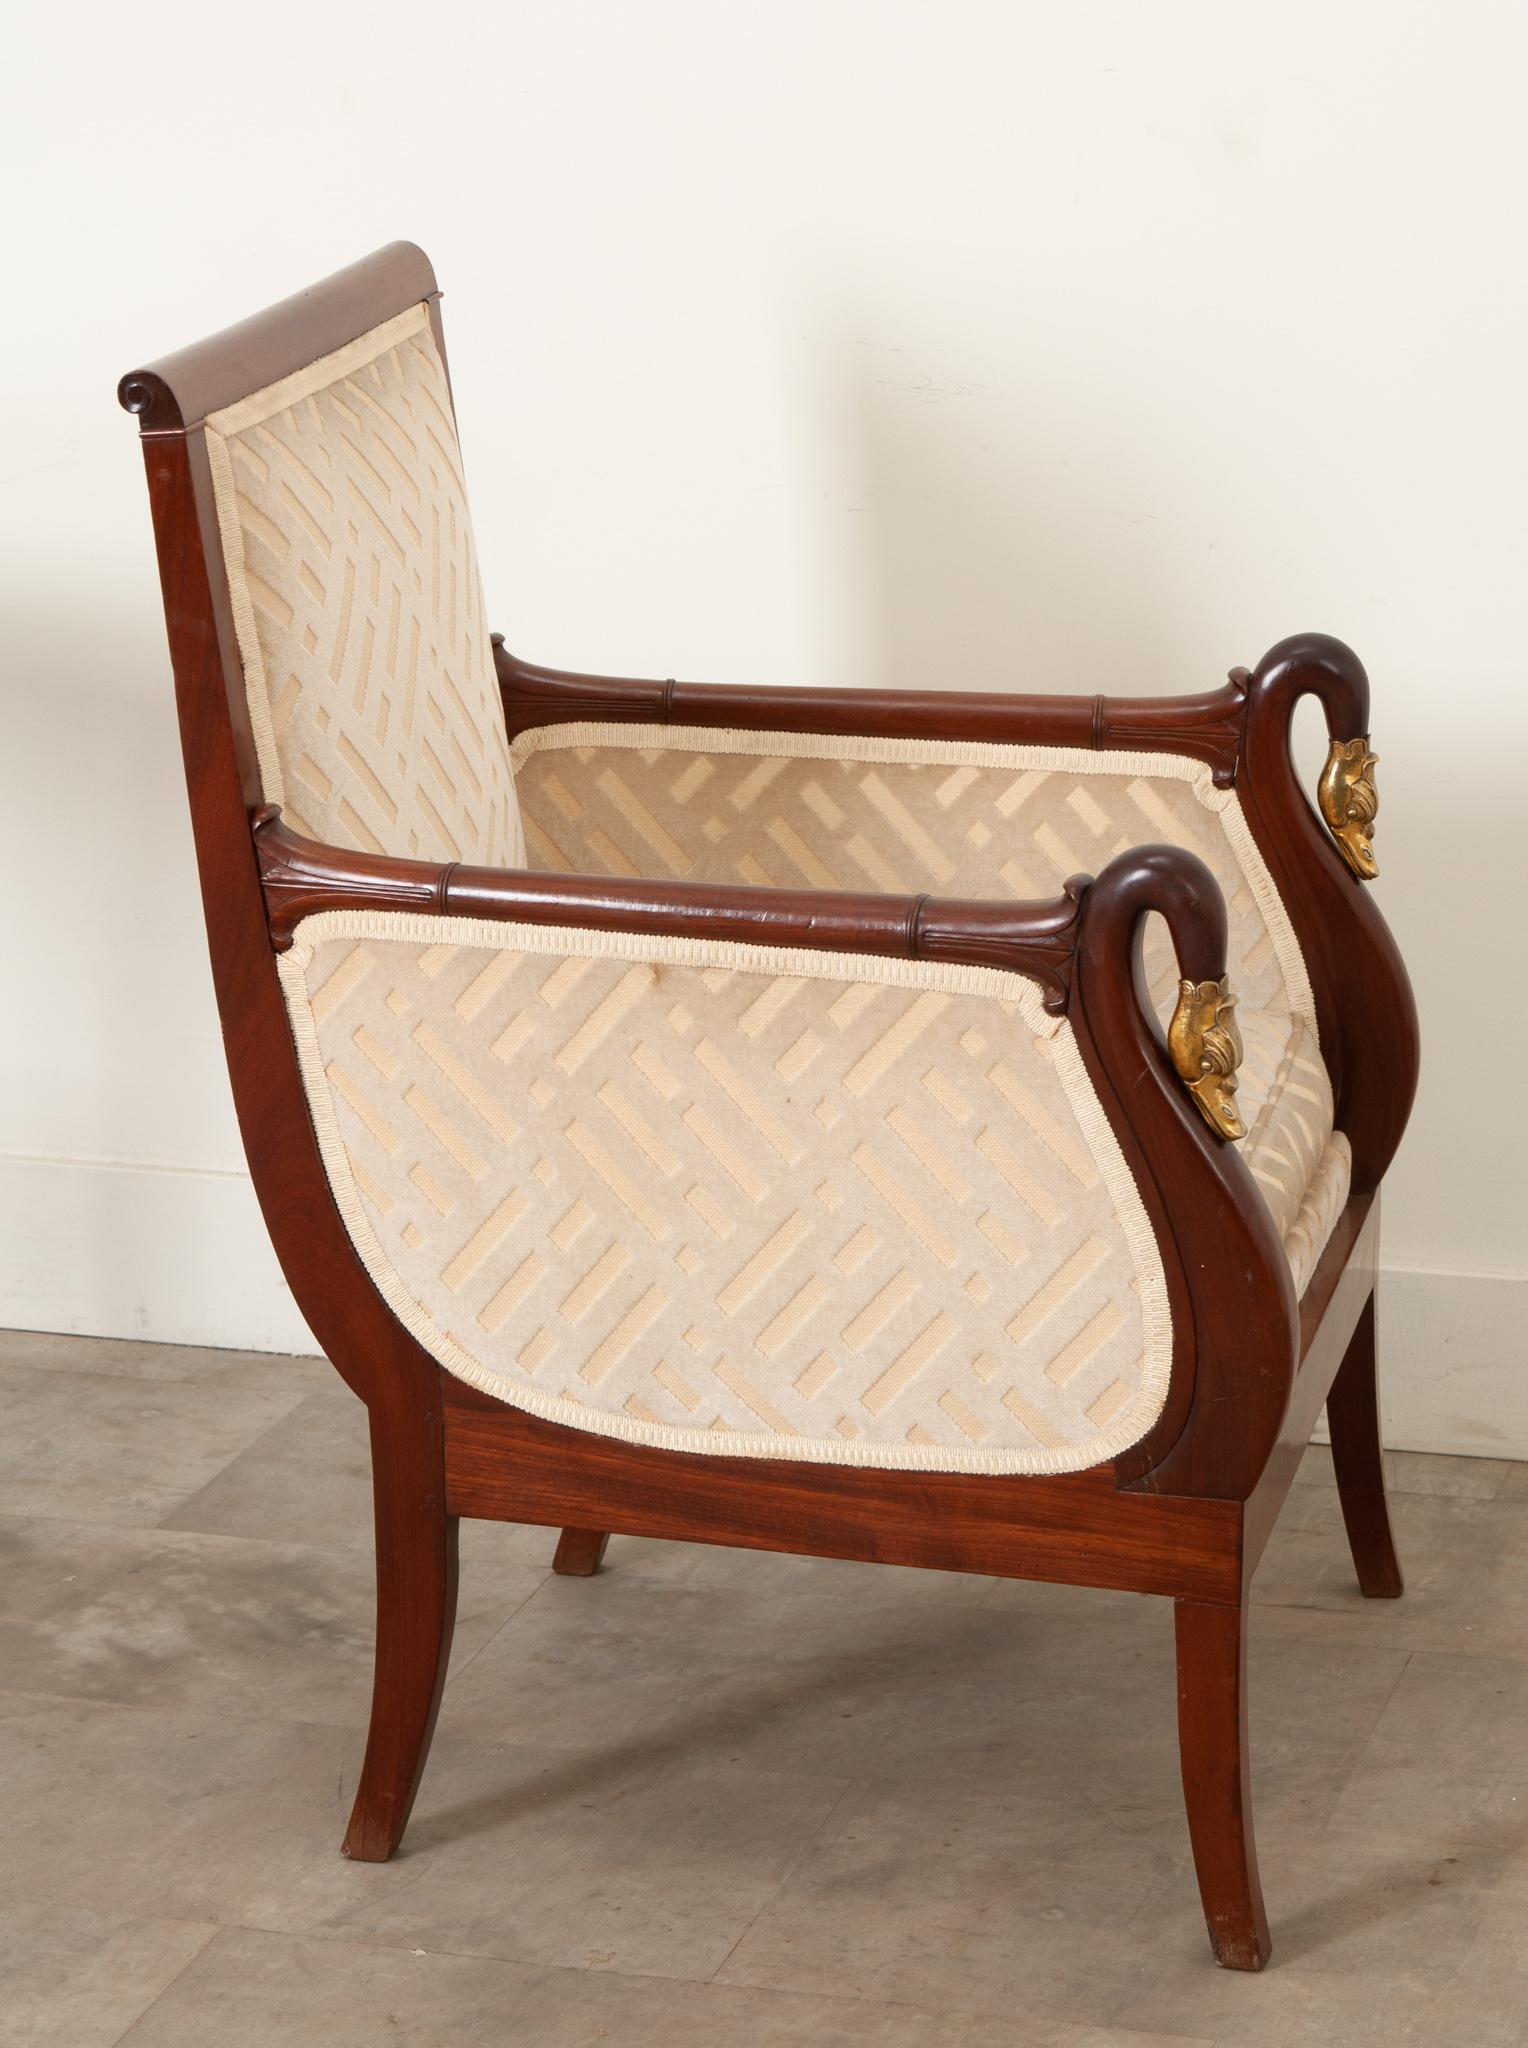 This restoration single bergere is made of solid mahogany and is sturdy. The chair has a squared off  back with detailed arms ending in gilt swans. This interesting antique chair has gently worn cut velvet upholstery with a coordinating tape trim.